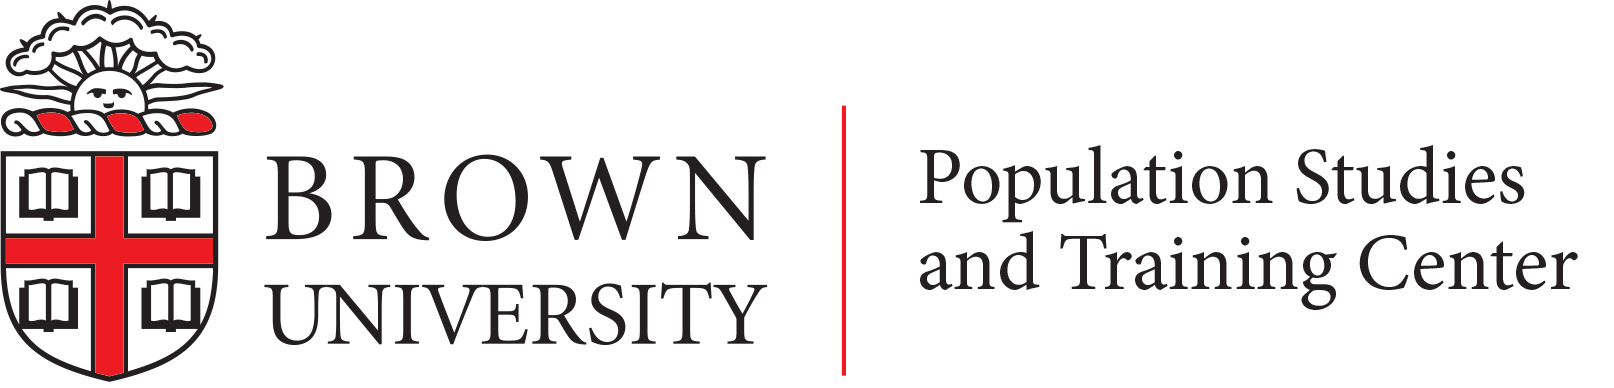 Population Studies and Training Center at Brown University